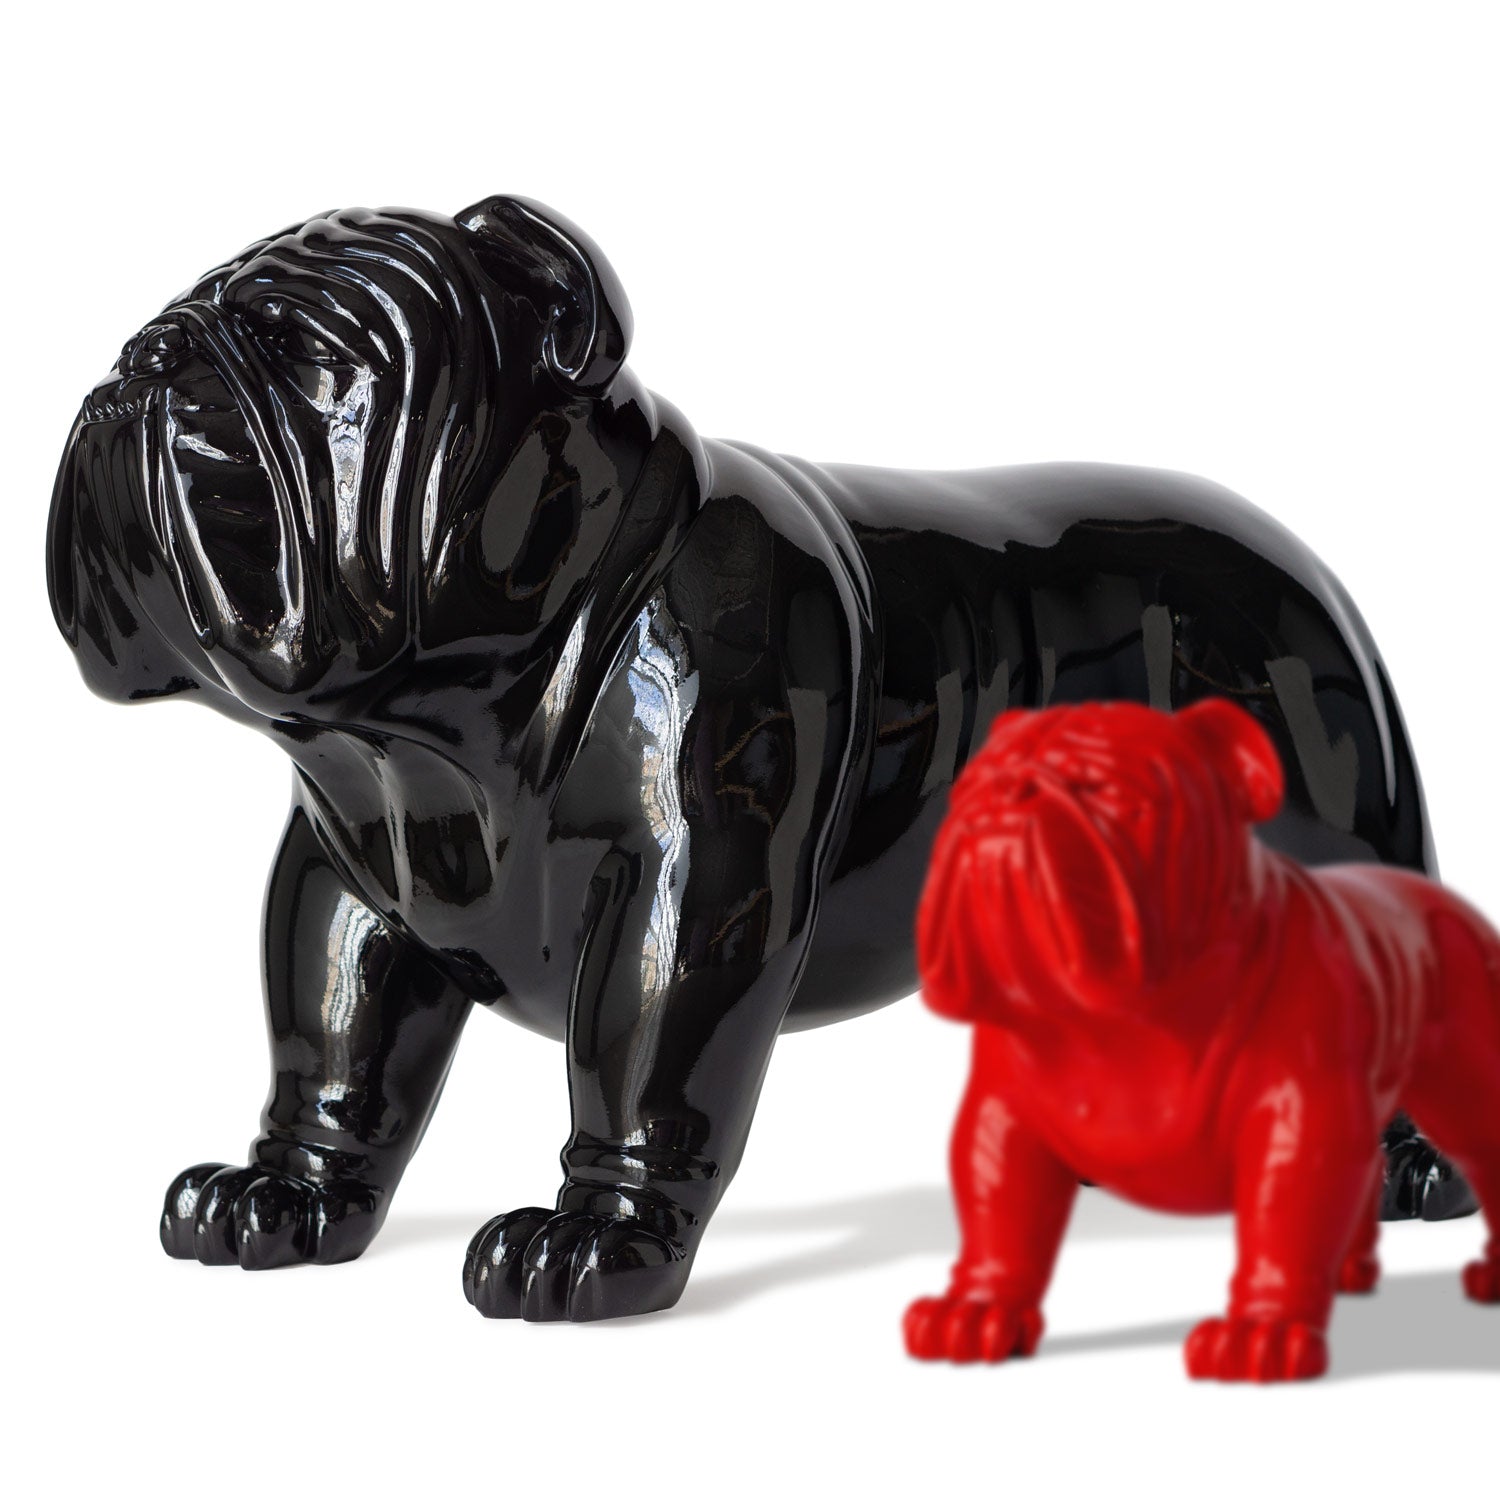 Large glossy black bulldog sculpture next to a smaller red bulldog sculpture on a white background.